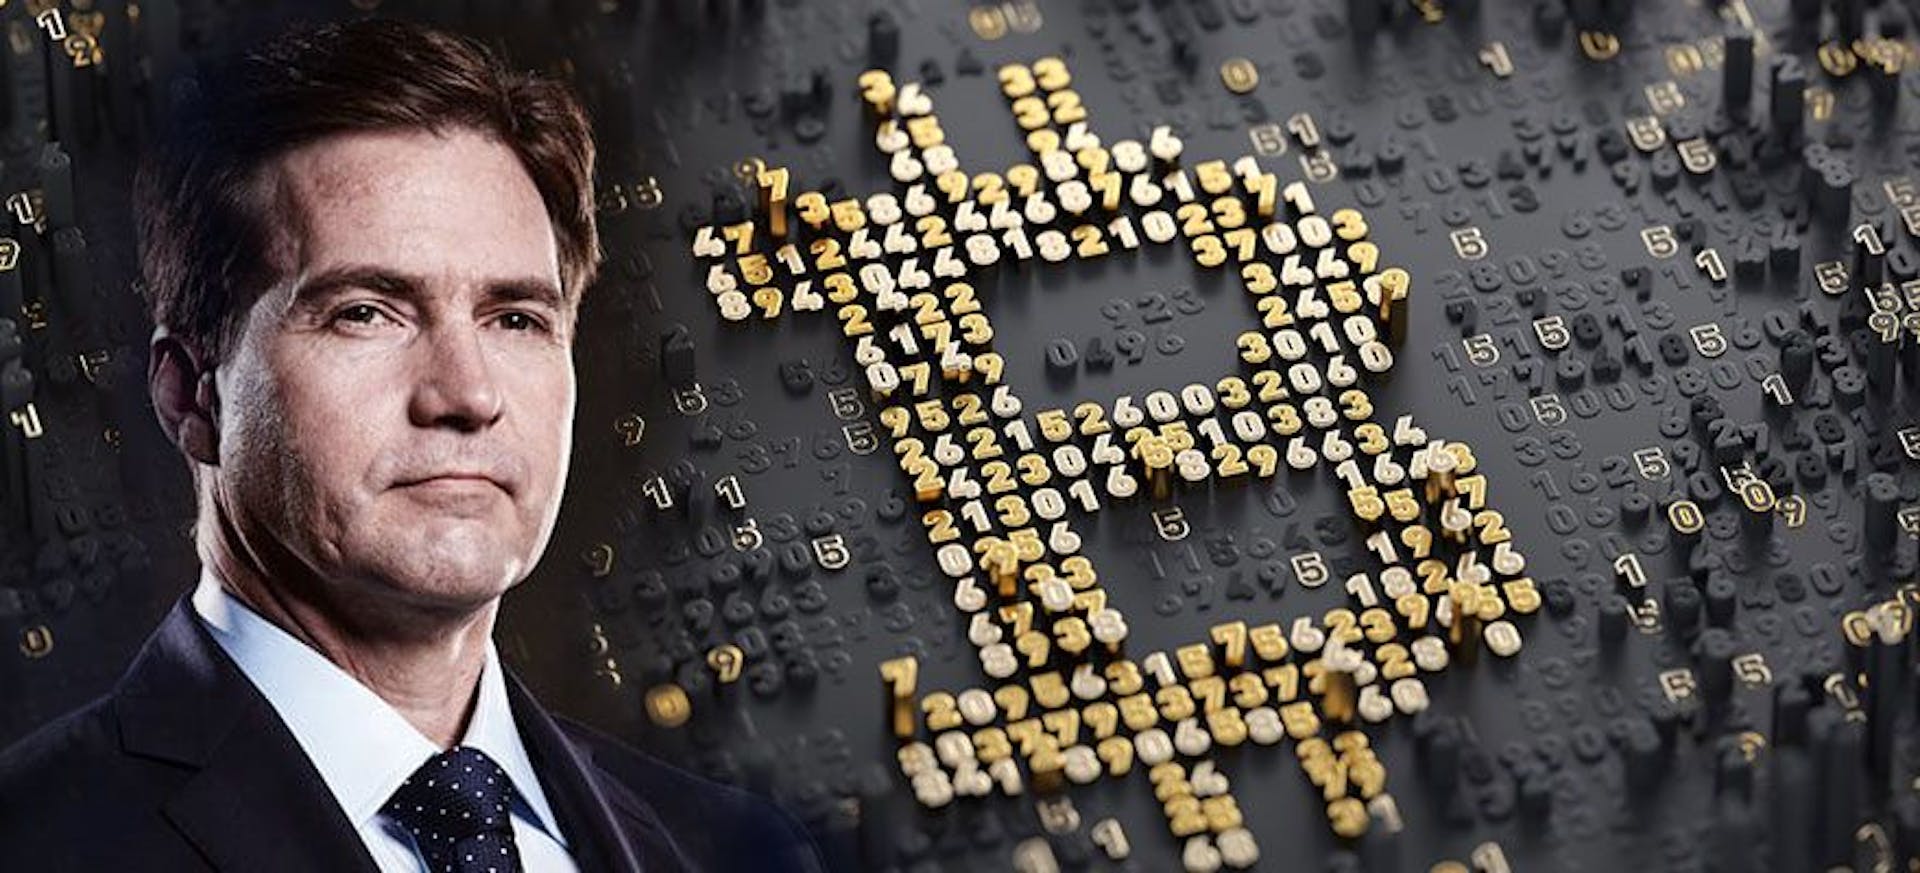 featured image - My Interview With Dr. Craig Wright, the Alleged Inventor of Bitcoin